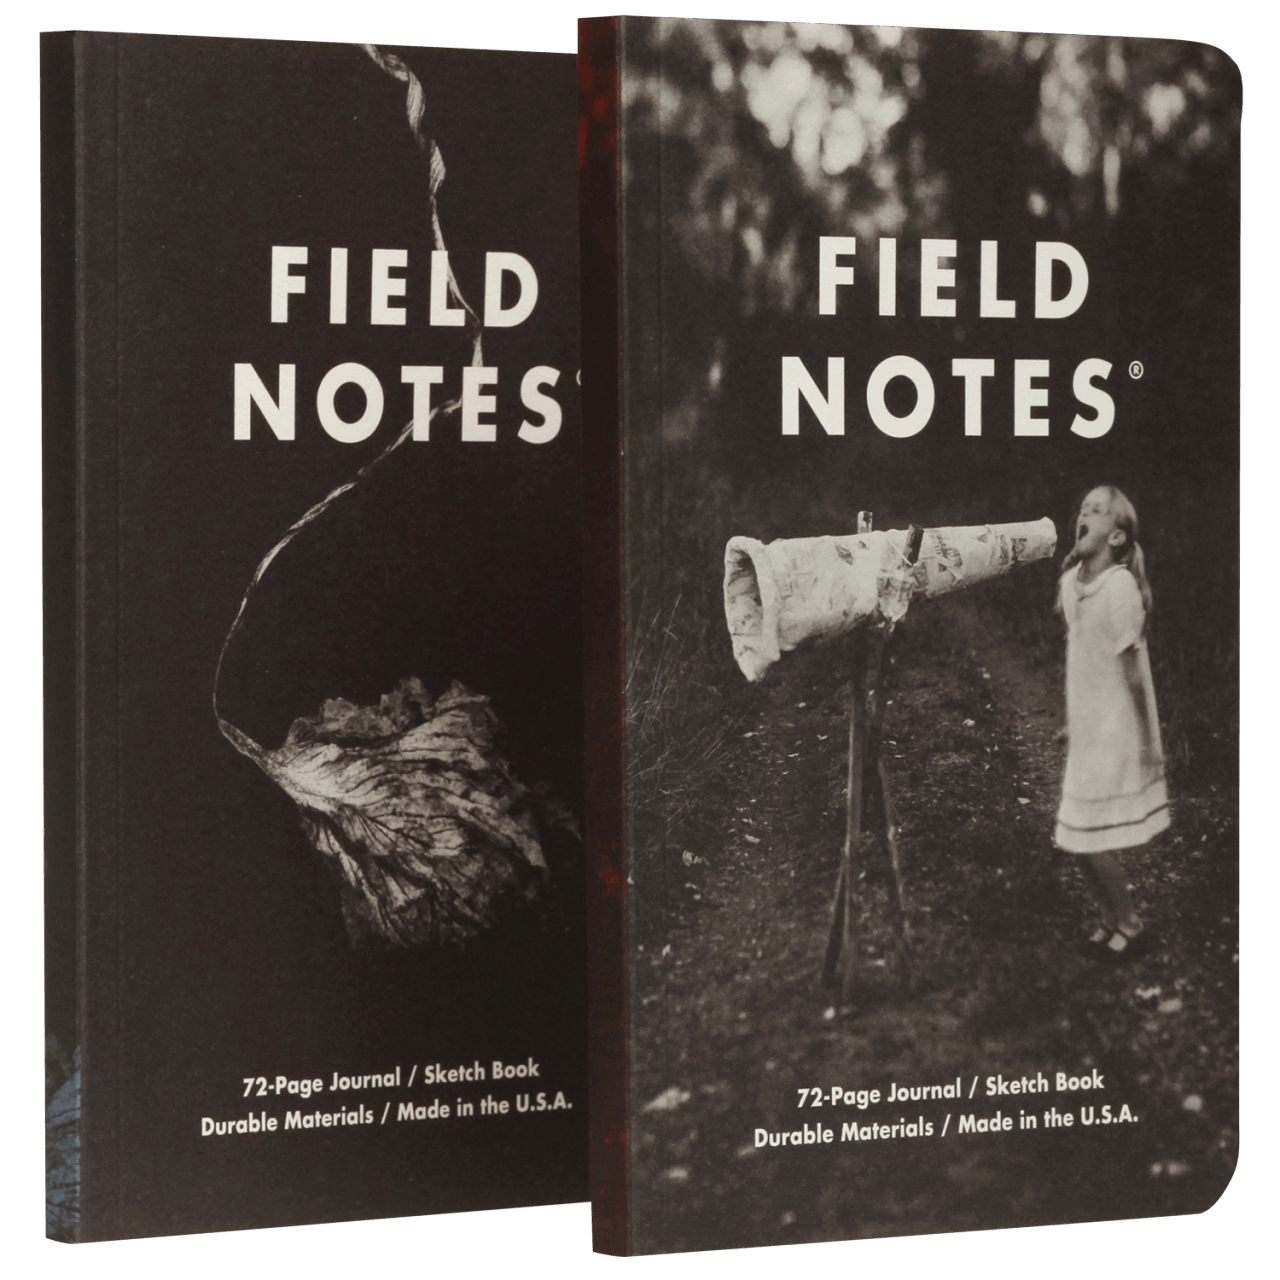 Field Notes “Maggie Rogers”